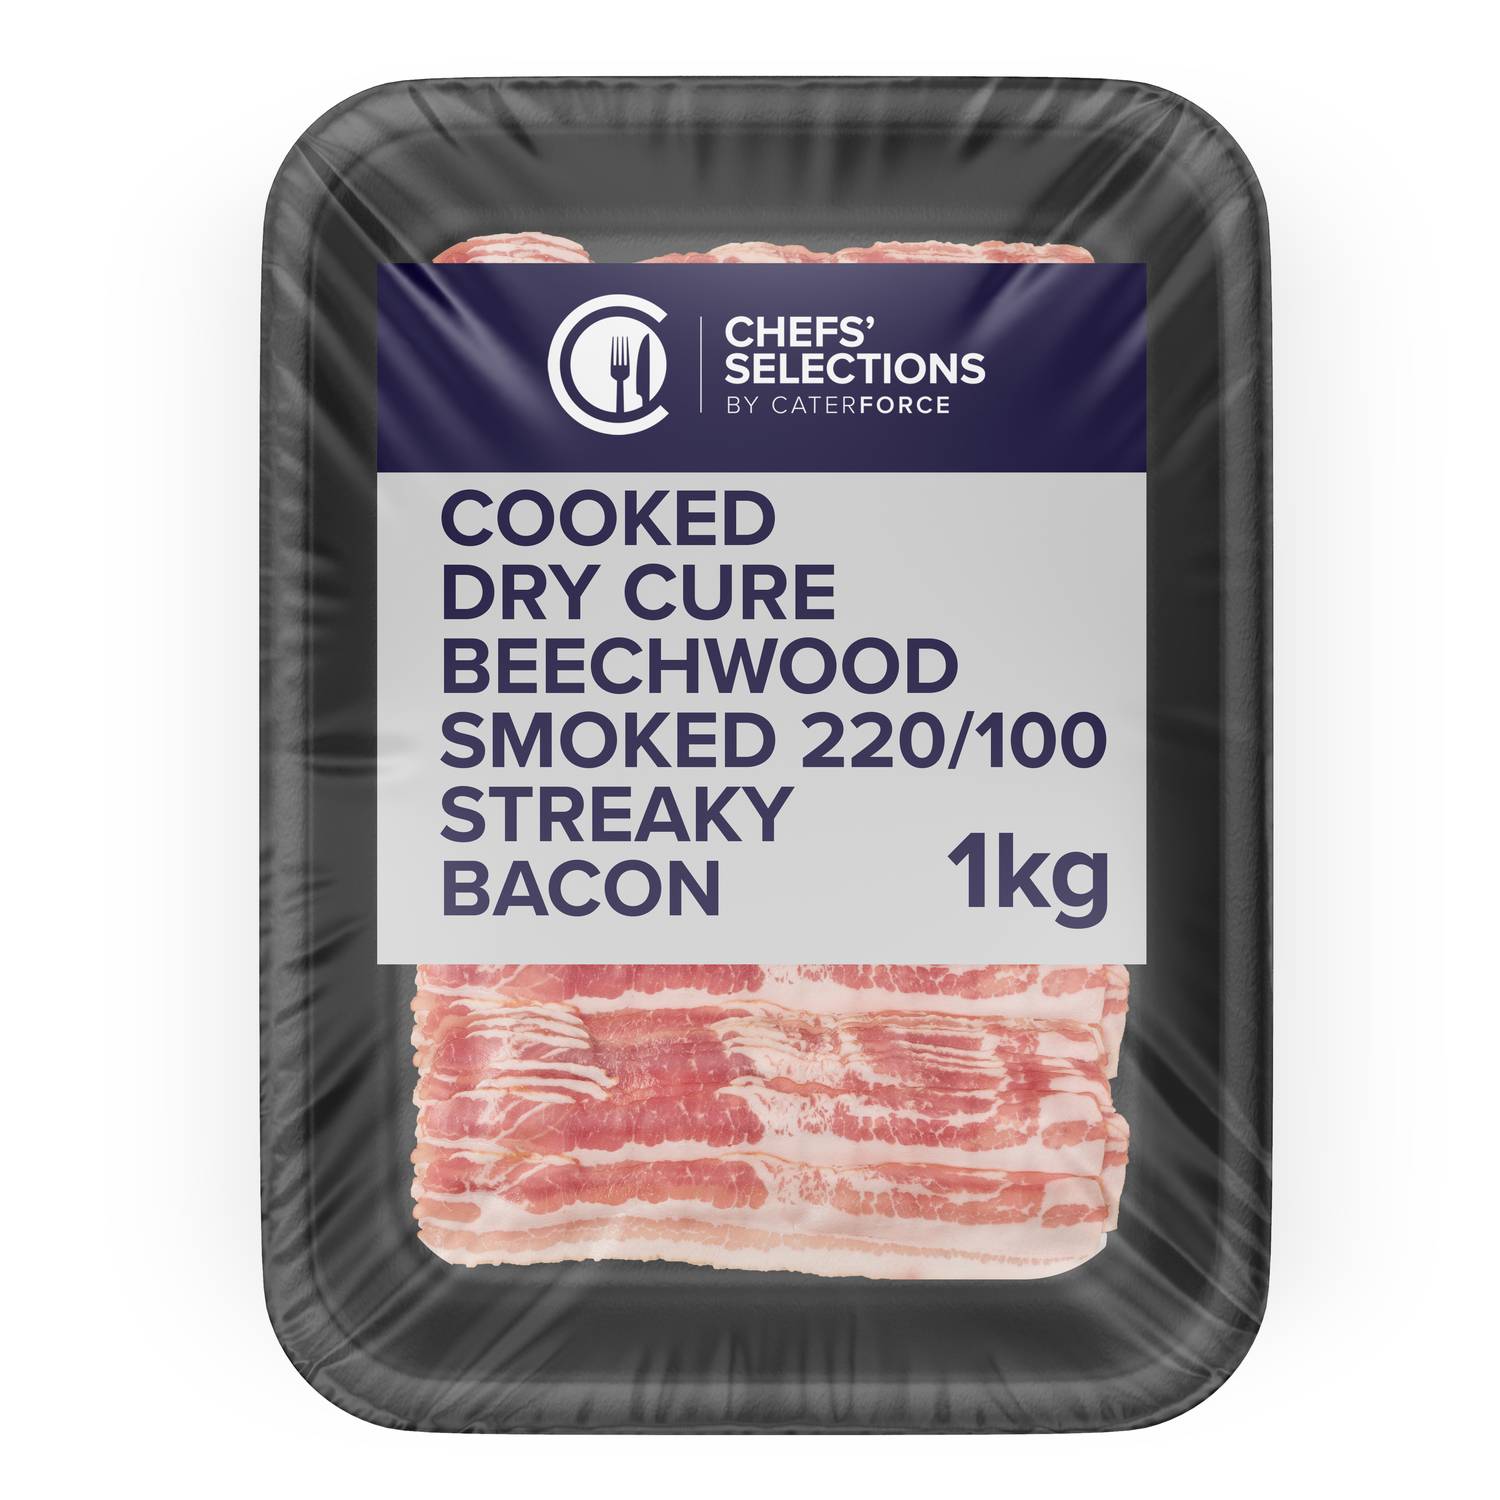 Chefs’ Selections Cooked Dry Cure Beechwood Smoked 220/100 Streaky Bacon (8 x 1kg)